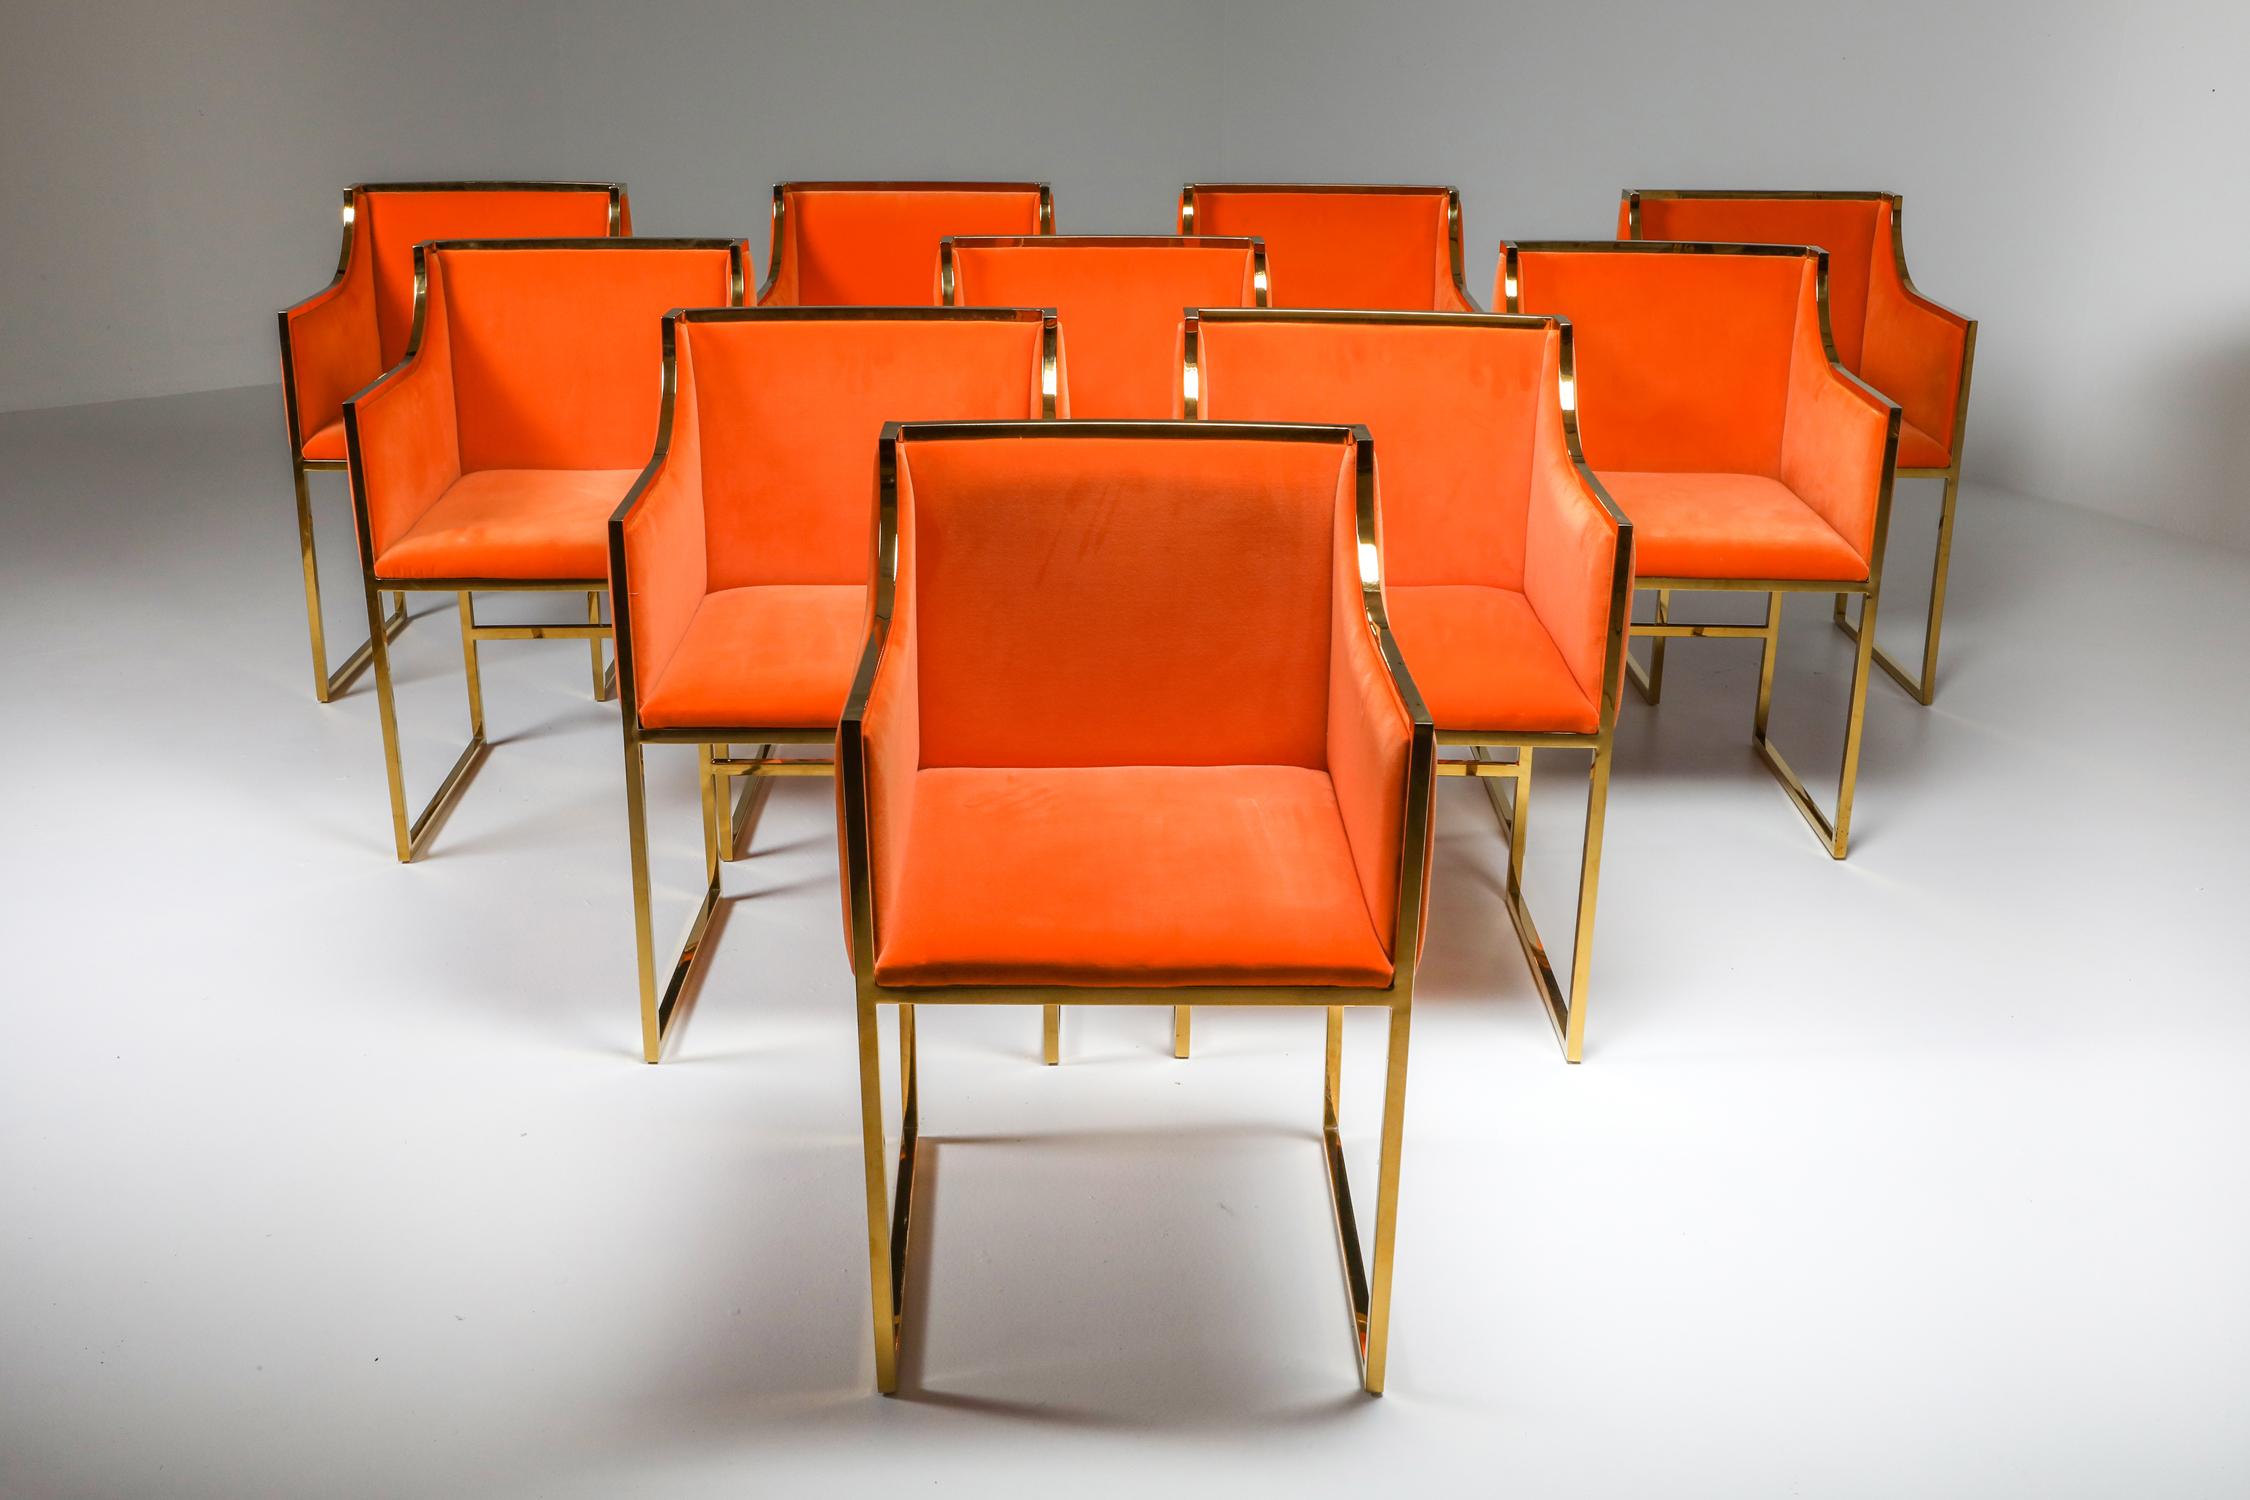 Brass and orange velvet dining chairs, Maison Jansen style, France, 1980s
Gorgeous set in great condition.
4 chairs available
Fits well in an eclectic Hollywood Regency decor inspired by Willy Rizzo, Romeo Rage, and Italian glam.
Price per